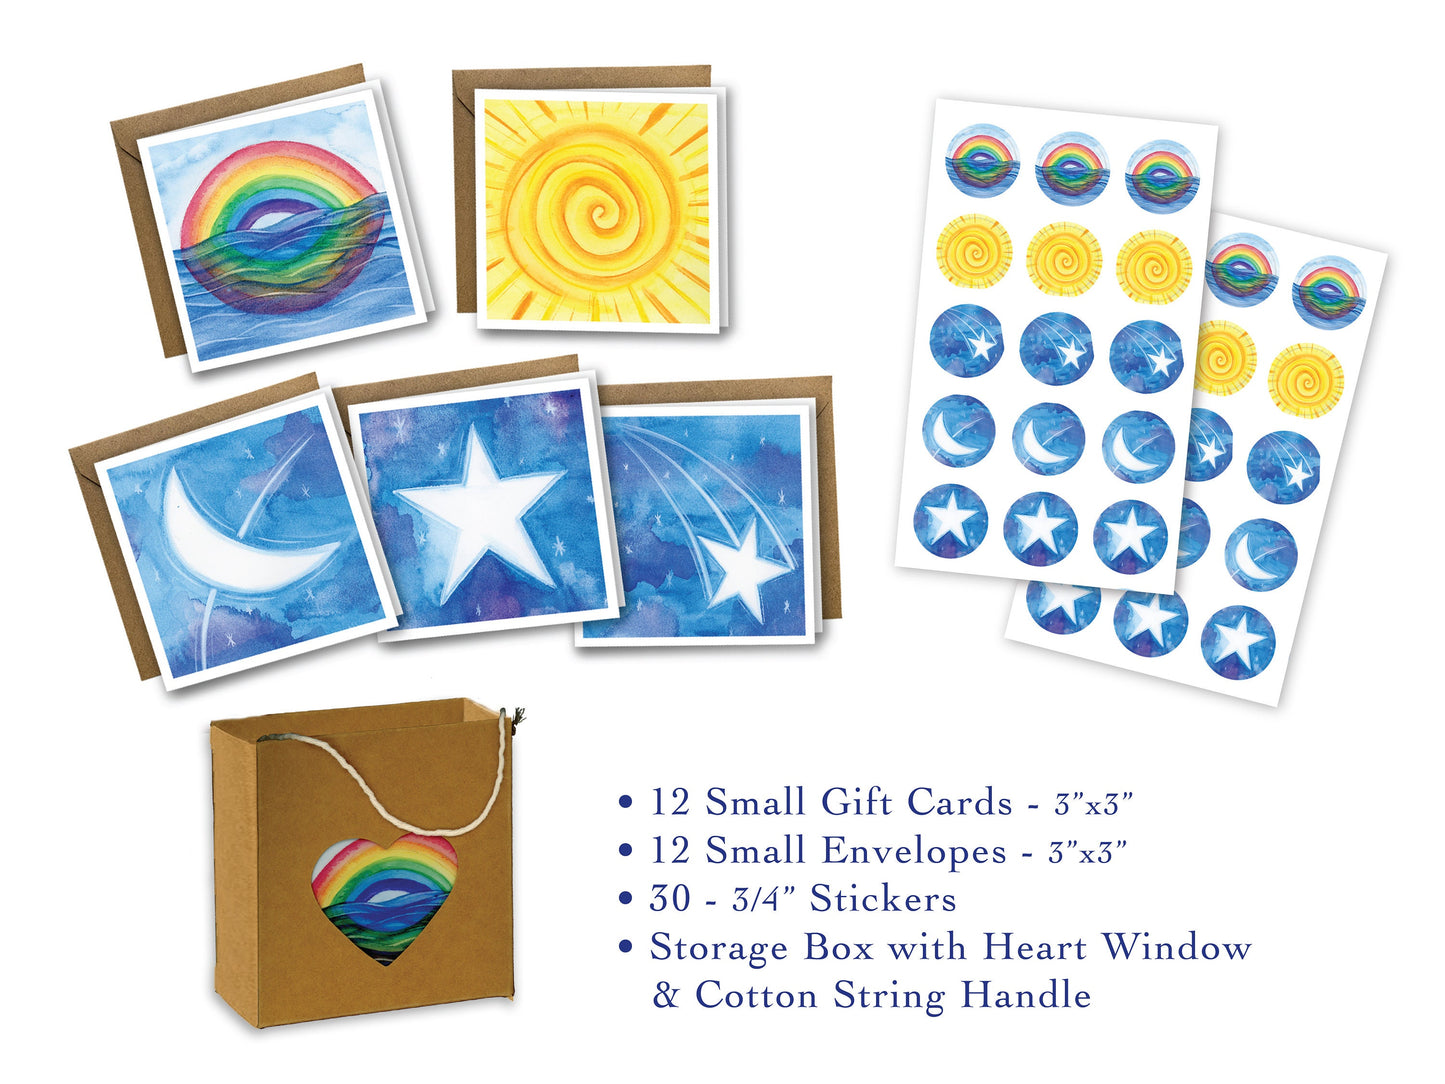 Gift Card Enclosures with Stickers - The Sky Series